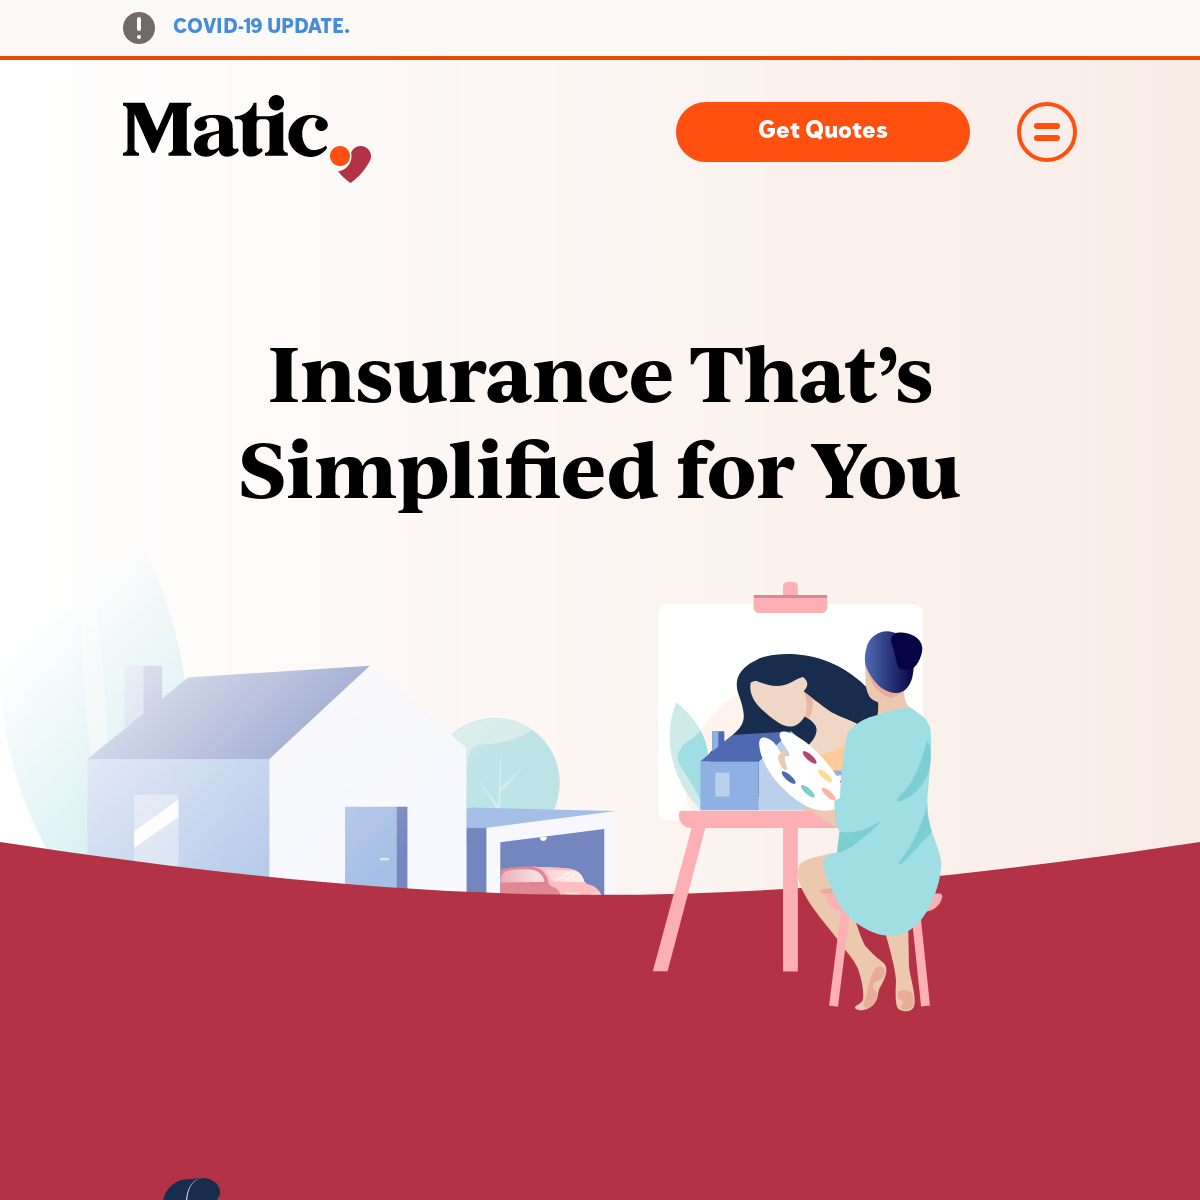 A complete backup of matic.com